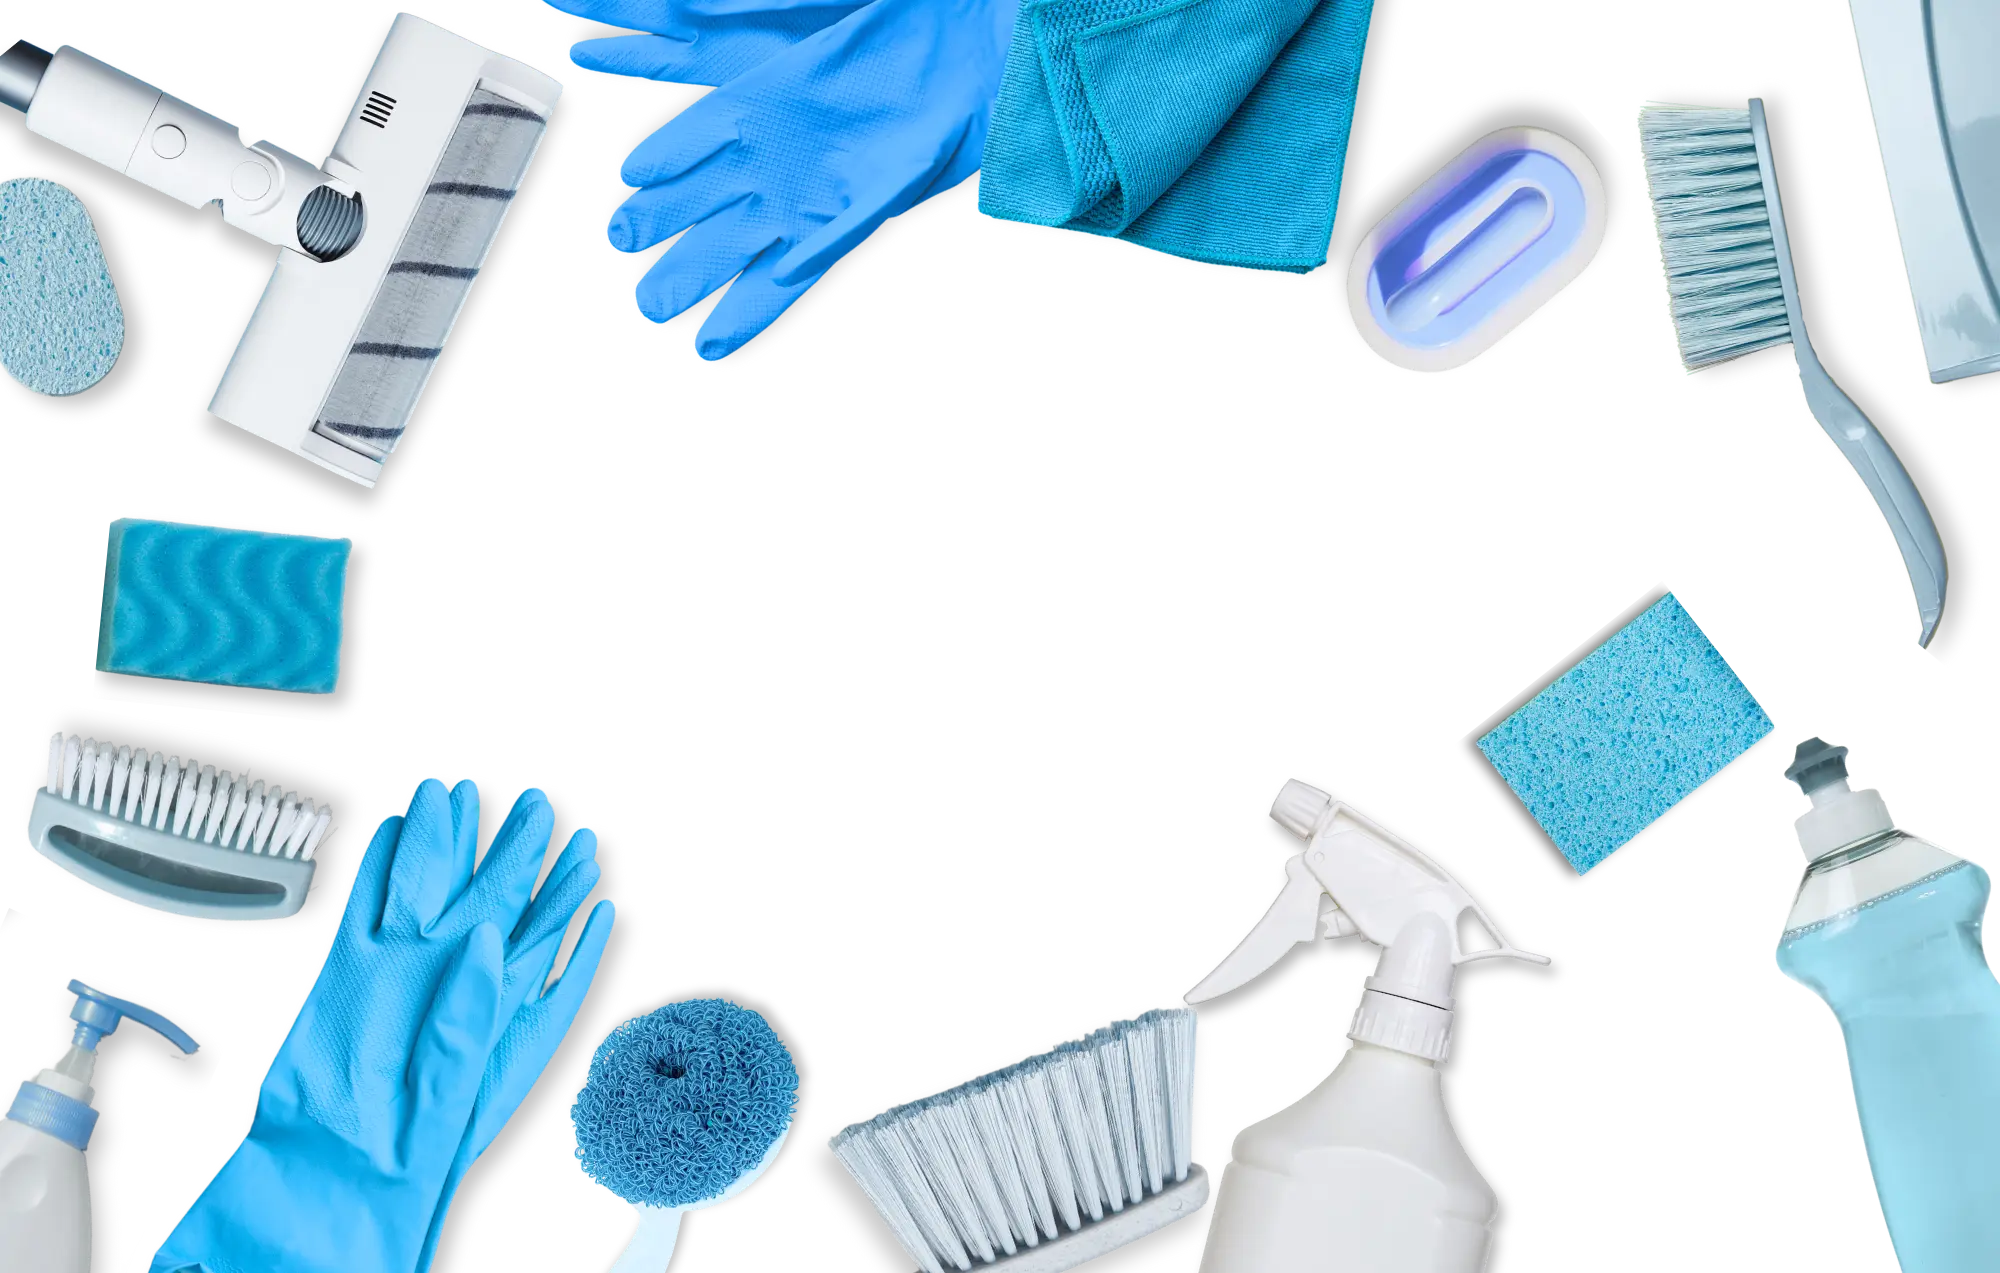 Array of professional cleaning equipment and supplies arranged on a clean background.